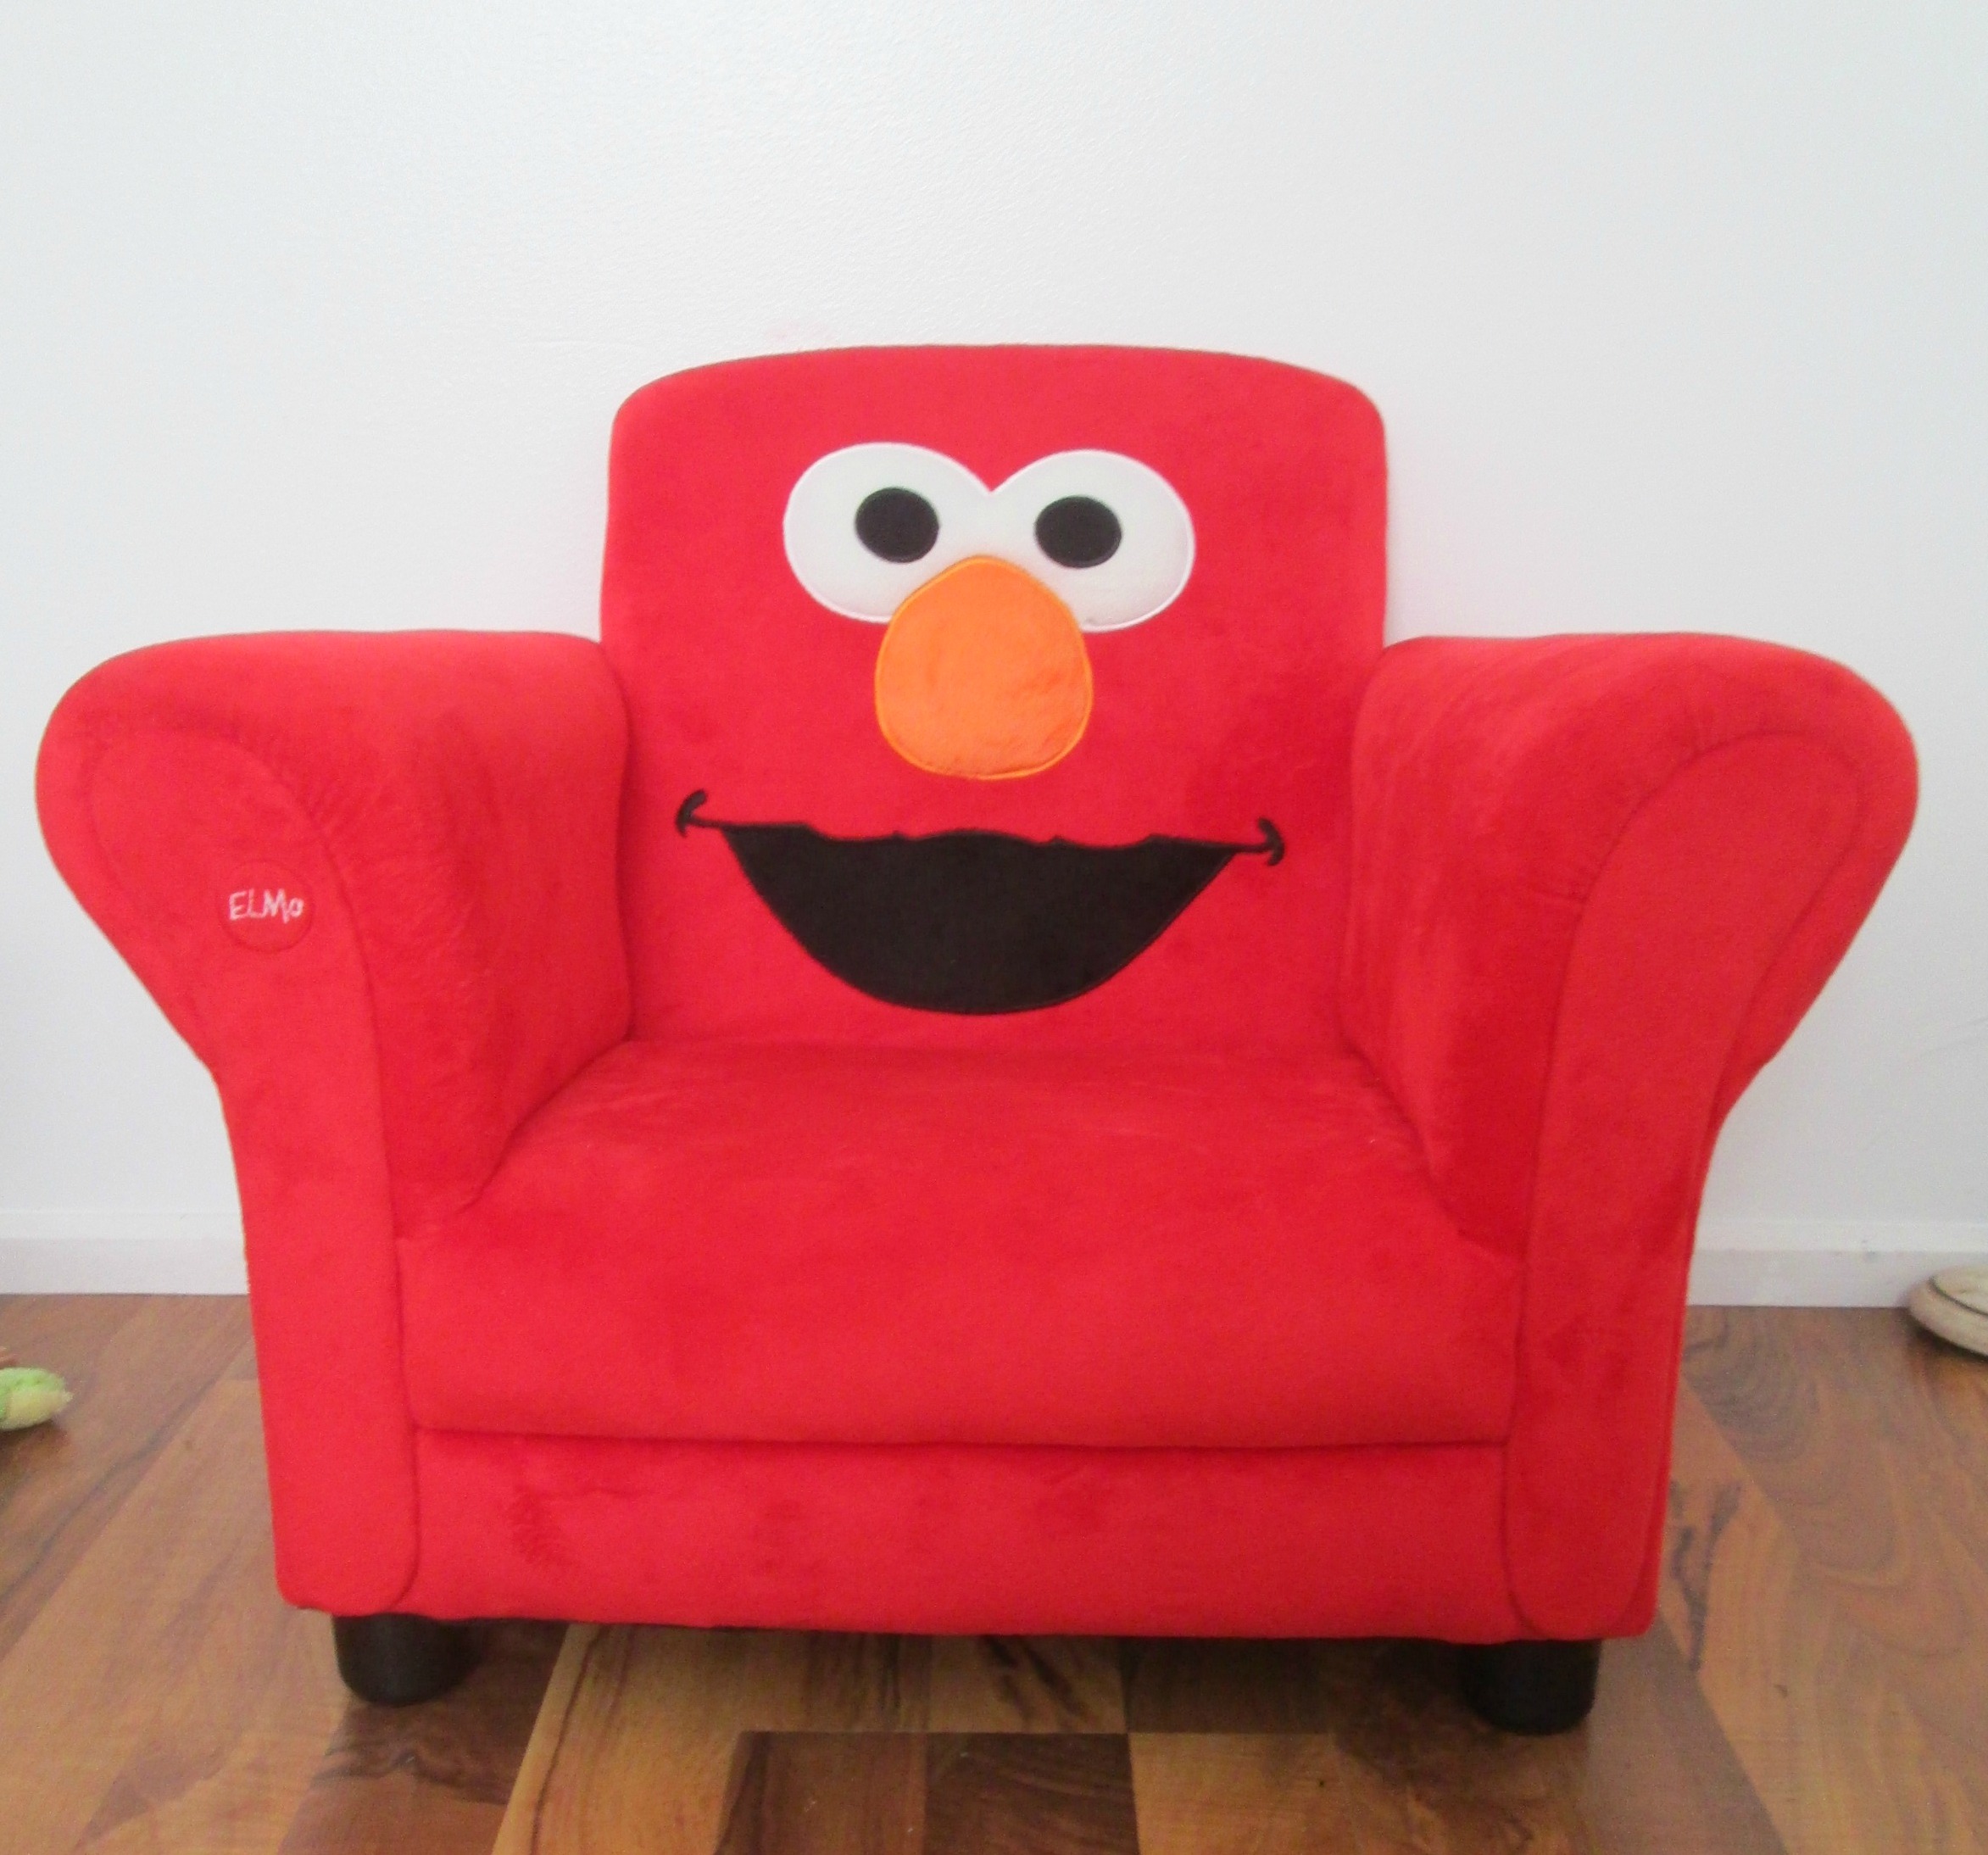 Details about   Kid-Friendly Upholstered Chair Featuring Elmo From Sesame Street 